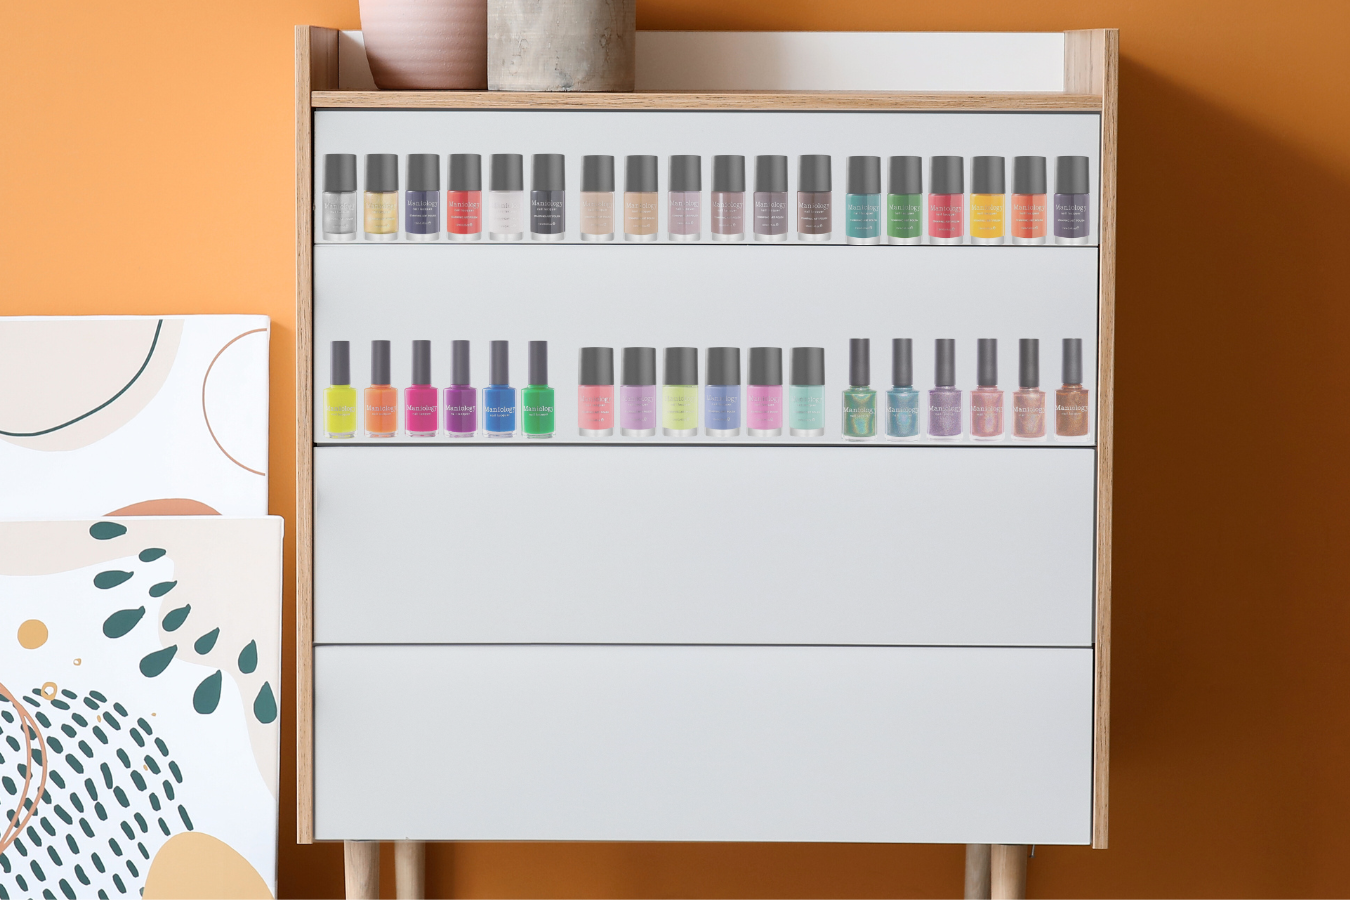 Designated Drawer arrange per color and finish type for Nail Polish Organization and Storage